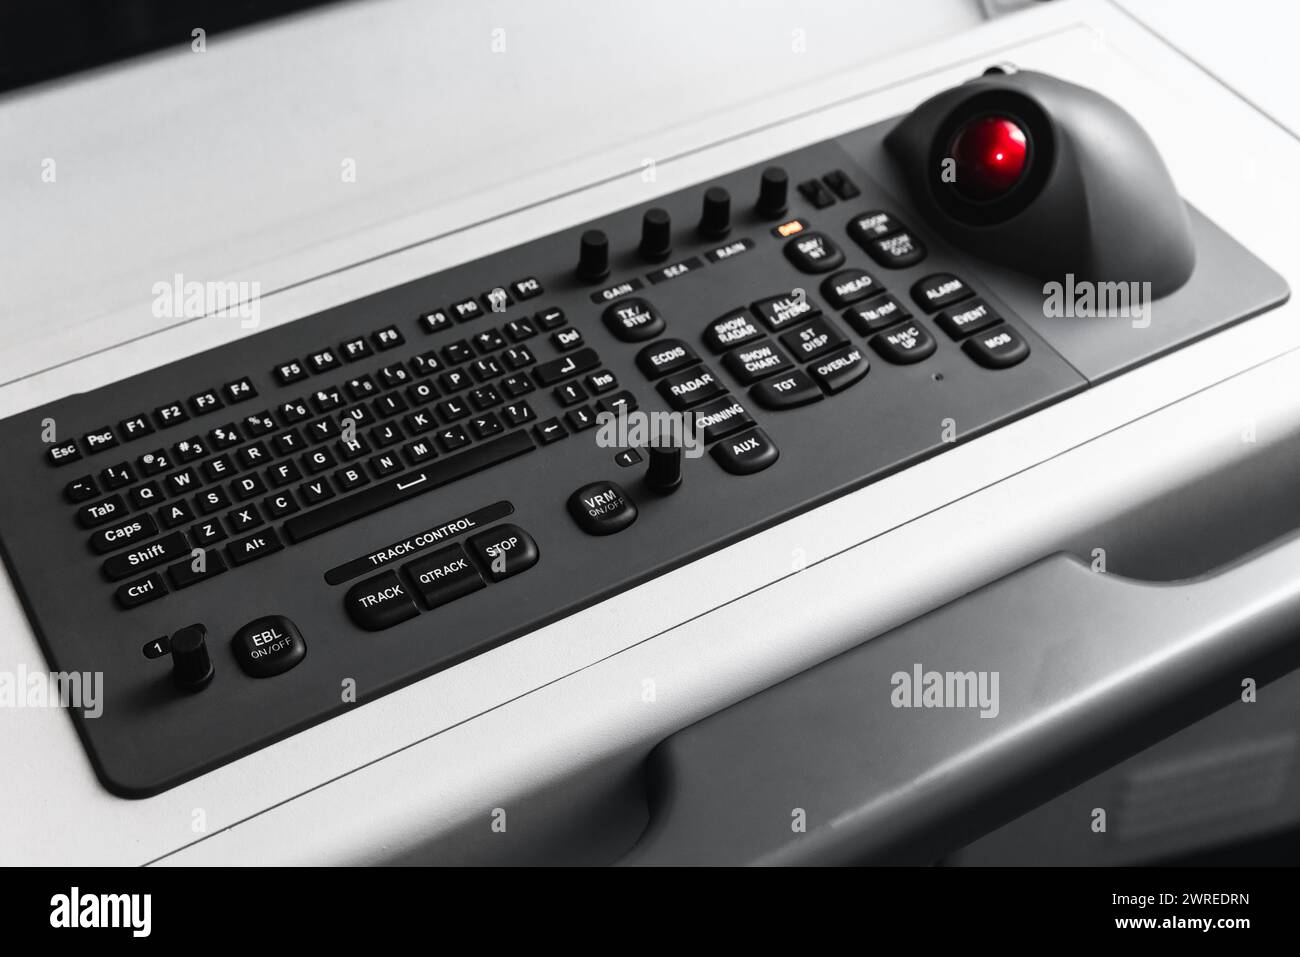 Built-in tabletop input device, black industrial keyboard with a trackball mouse, modern navigation equipment mounted on a control panel at captains b Stock Photo